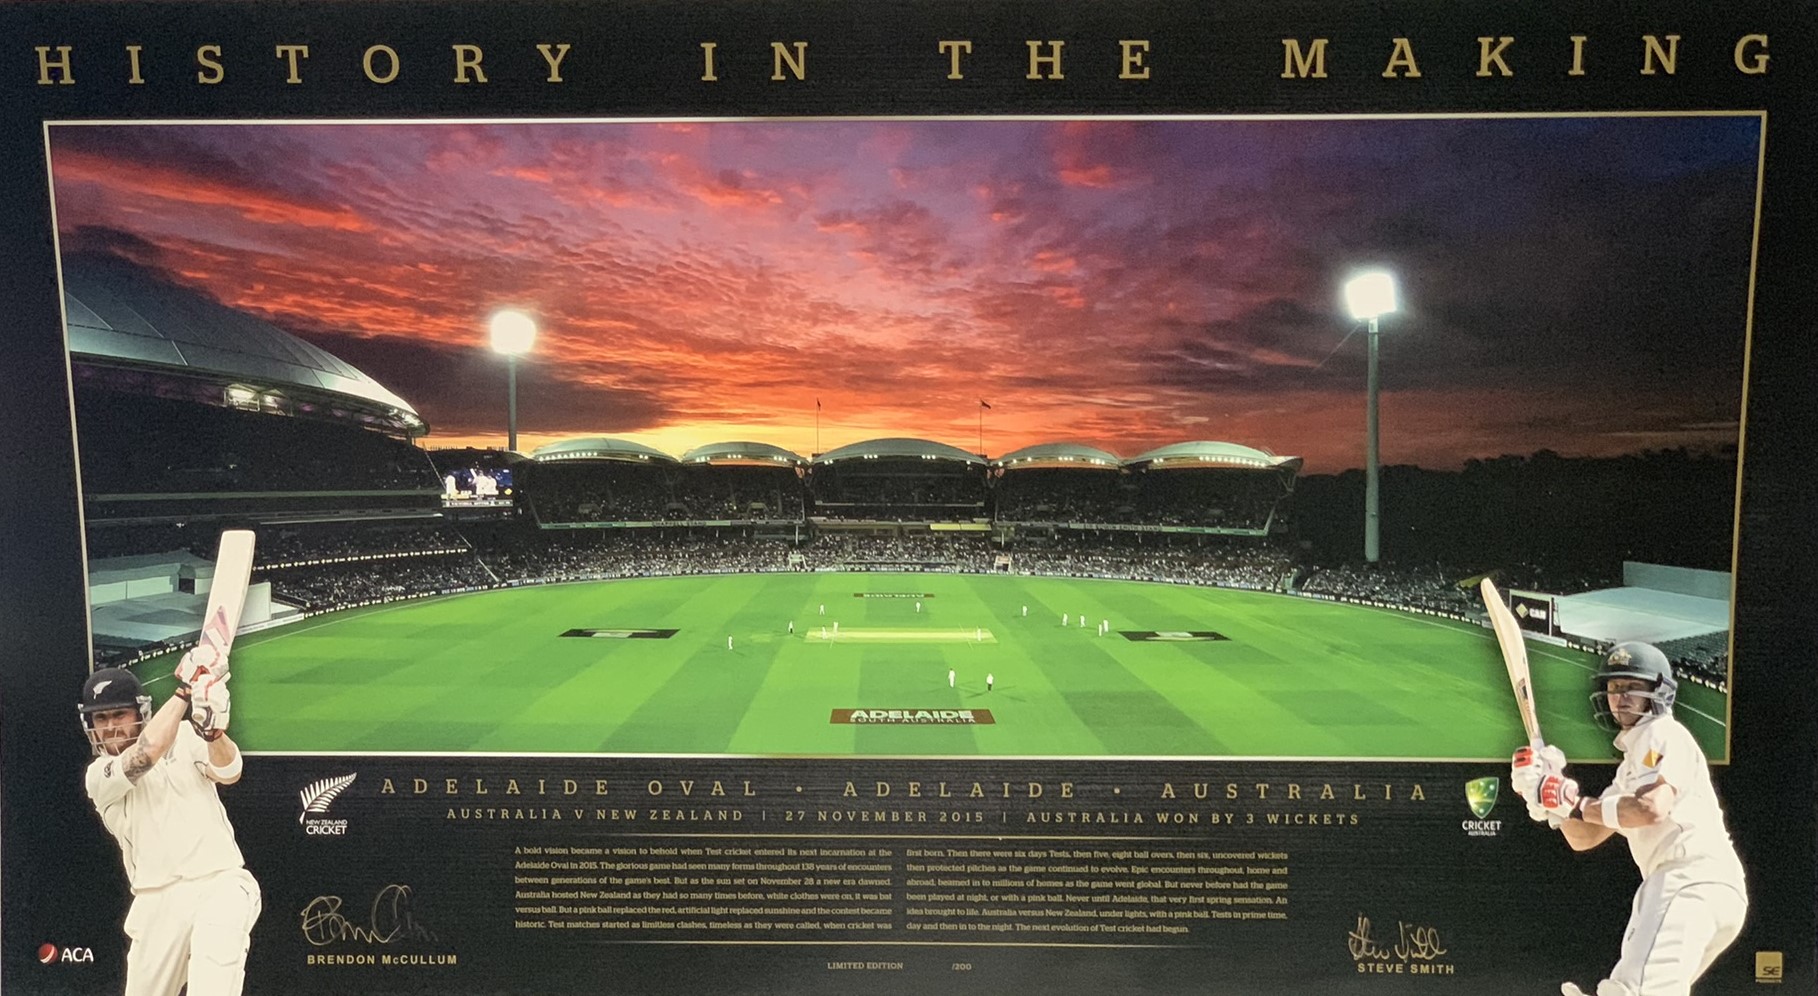 Australia / New Zealand: Dual captains signed limited edition print, “History in the making –